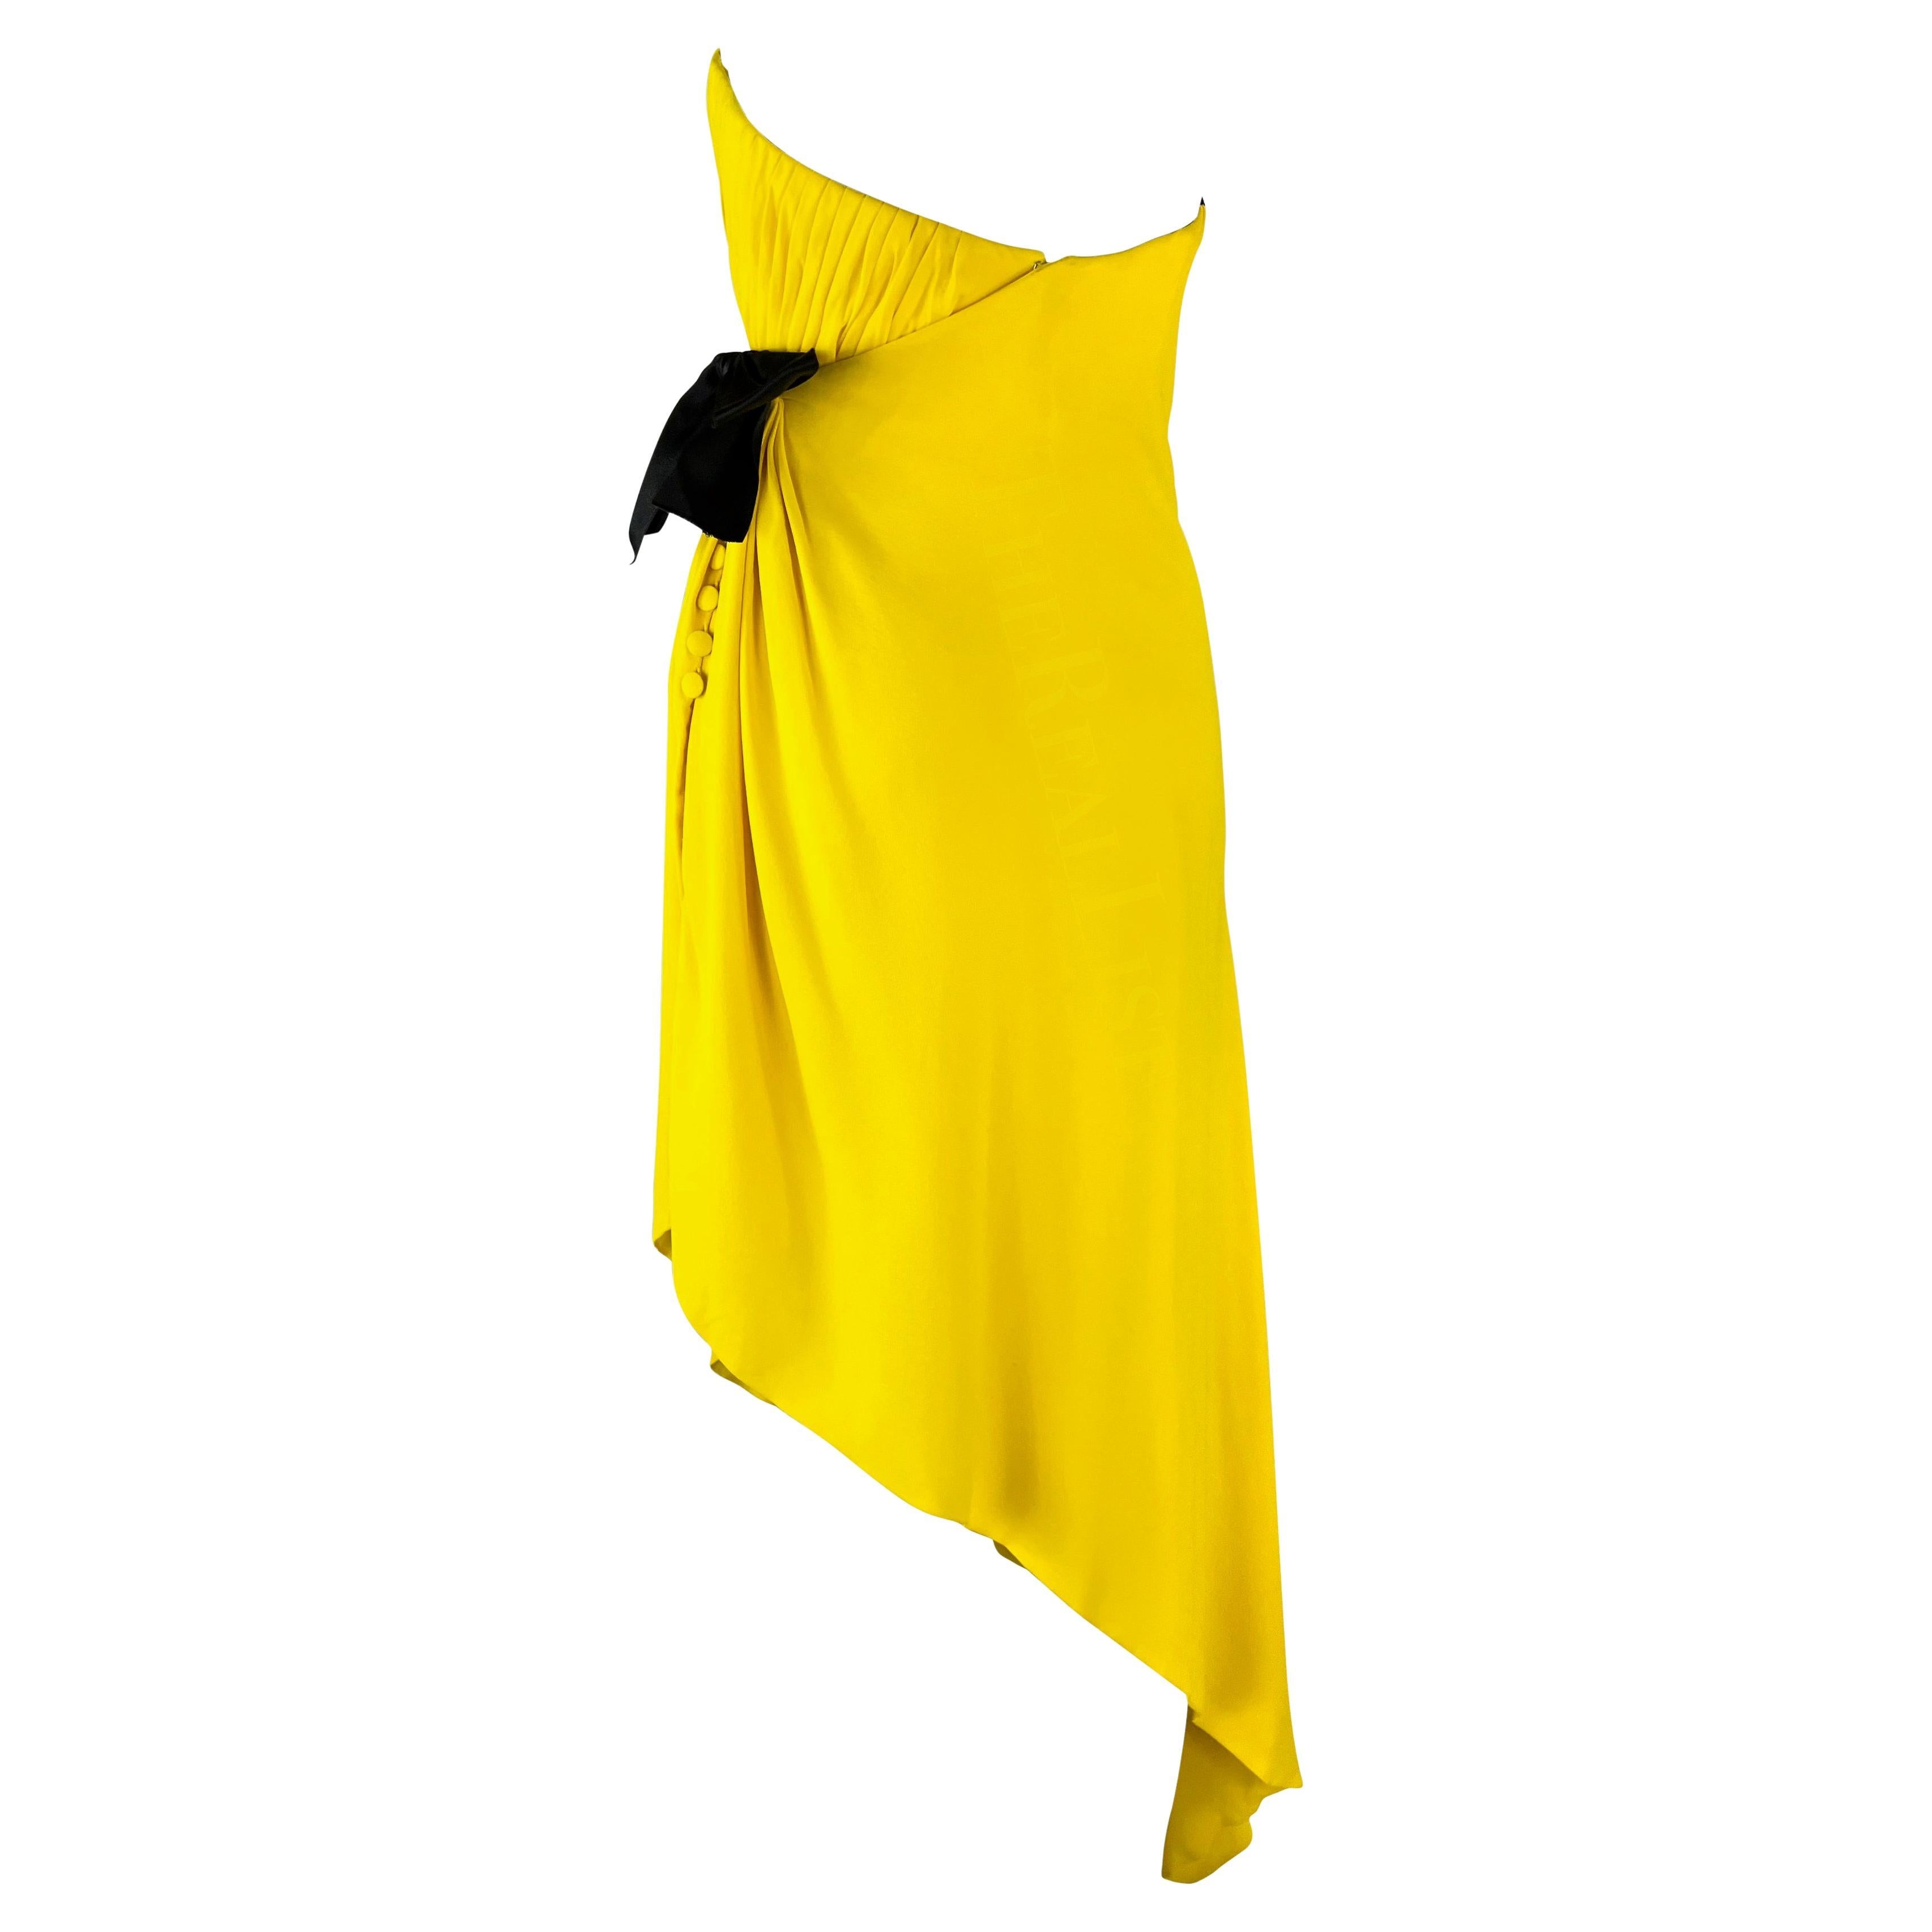 S/S 1991 Chanel by Karl Lagerfeld Runway Ad Yellow Strapless Asymmetric Dress For Sale 2